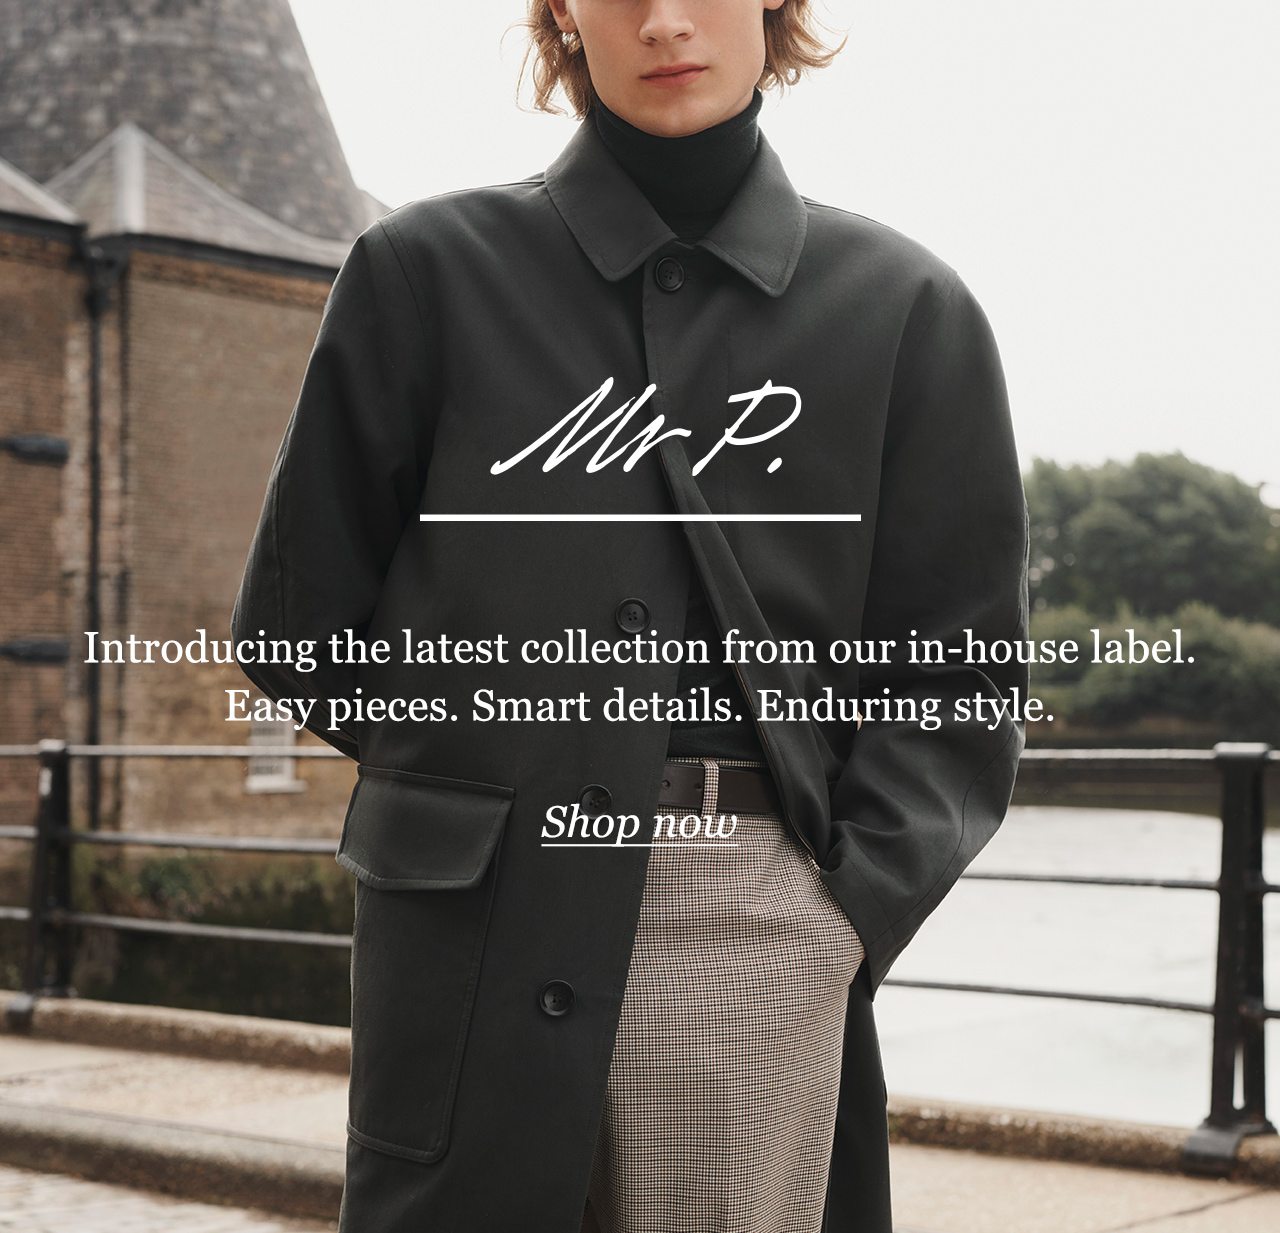 Introducing the latest collection from our in-house label. Easy pieces. Smart details. Enduring style.